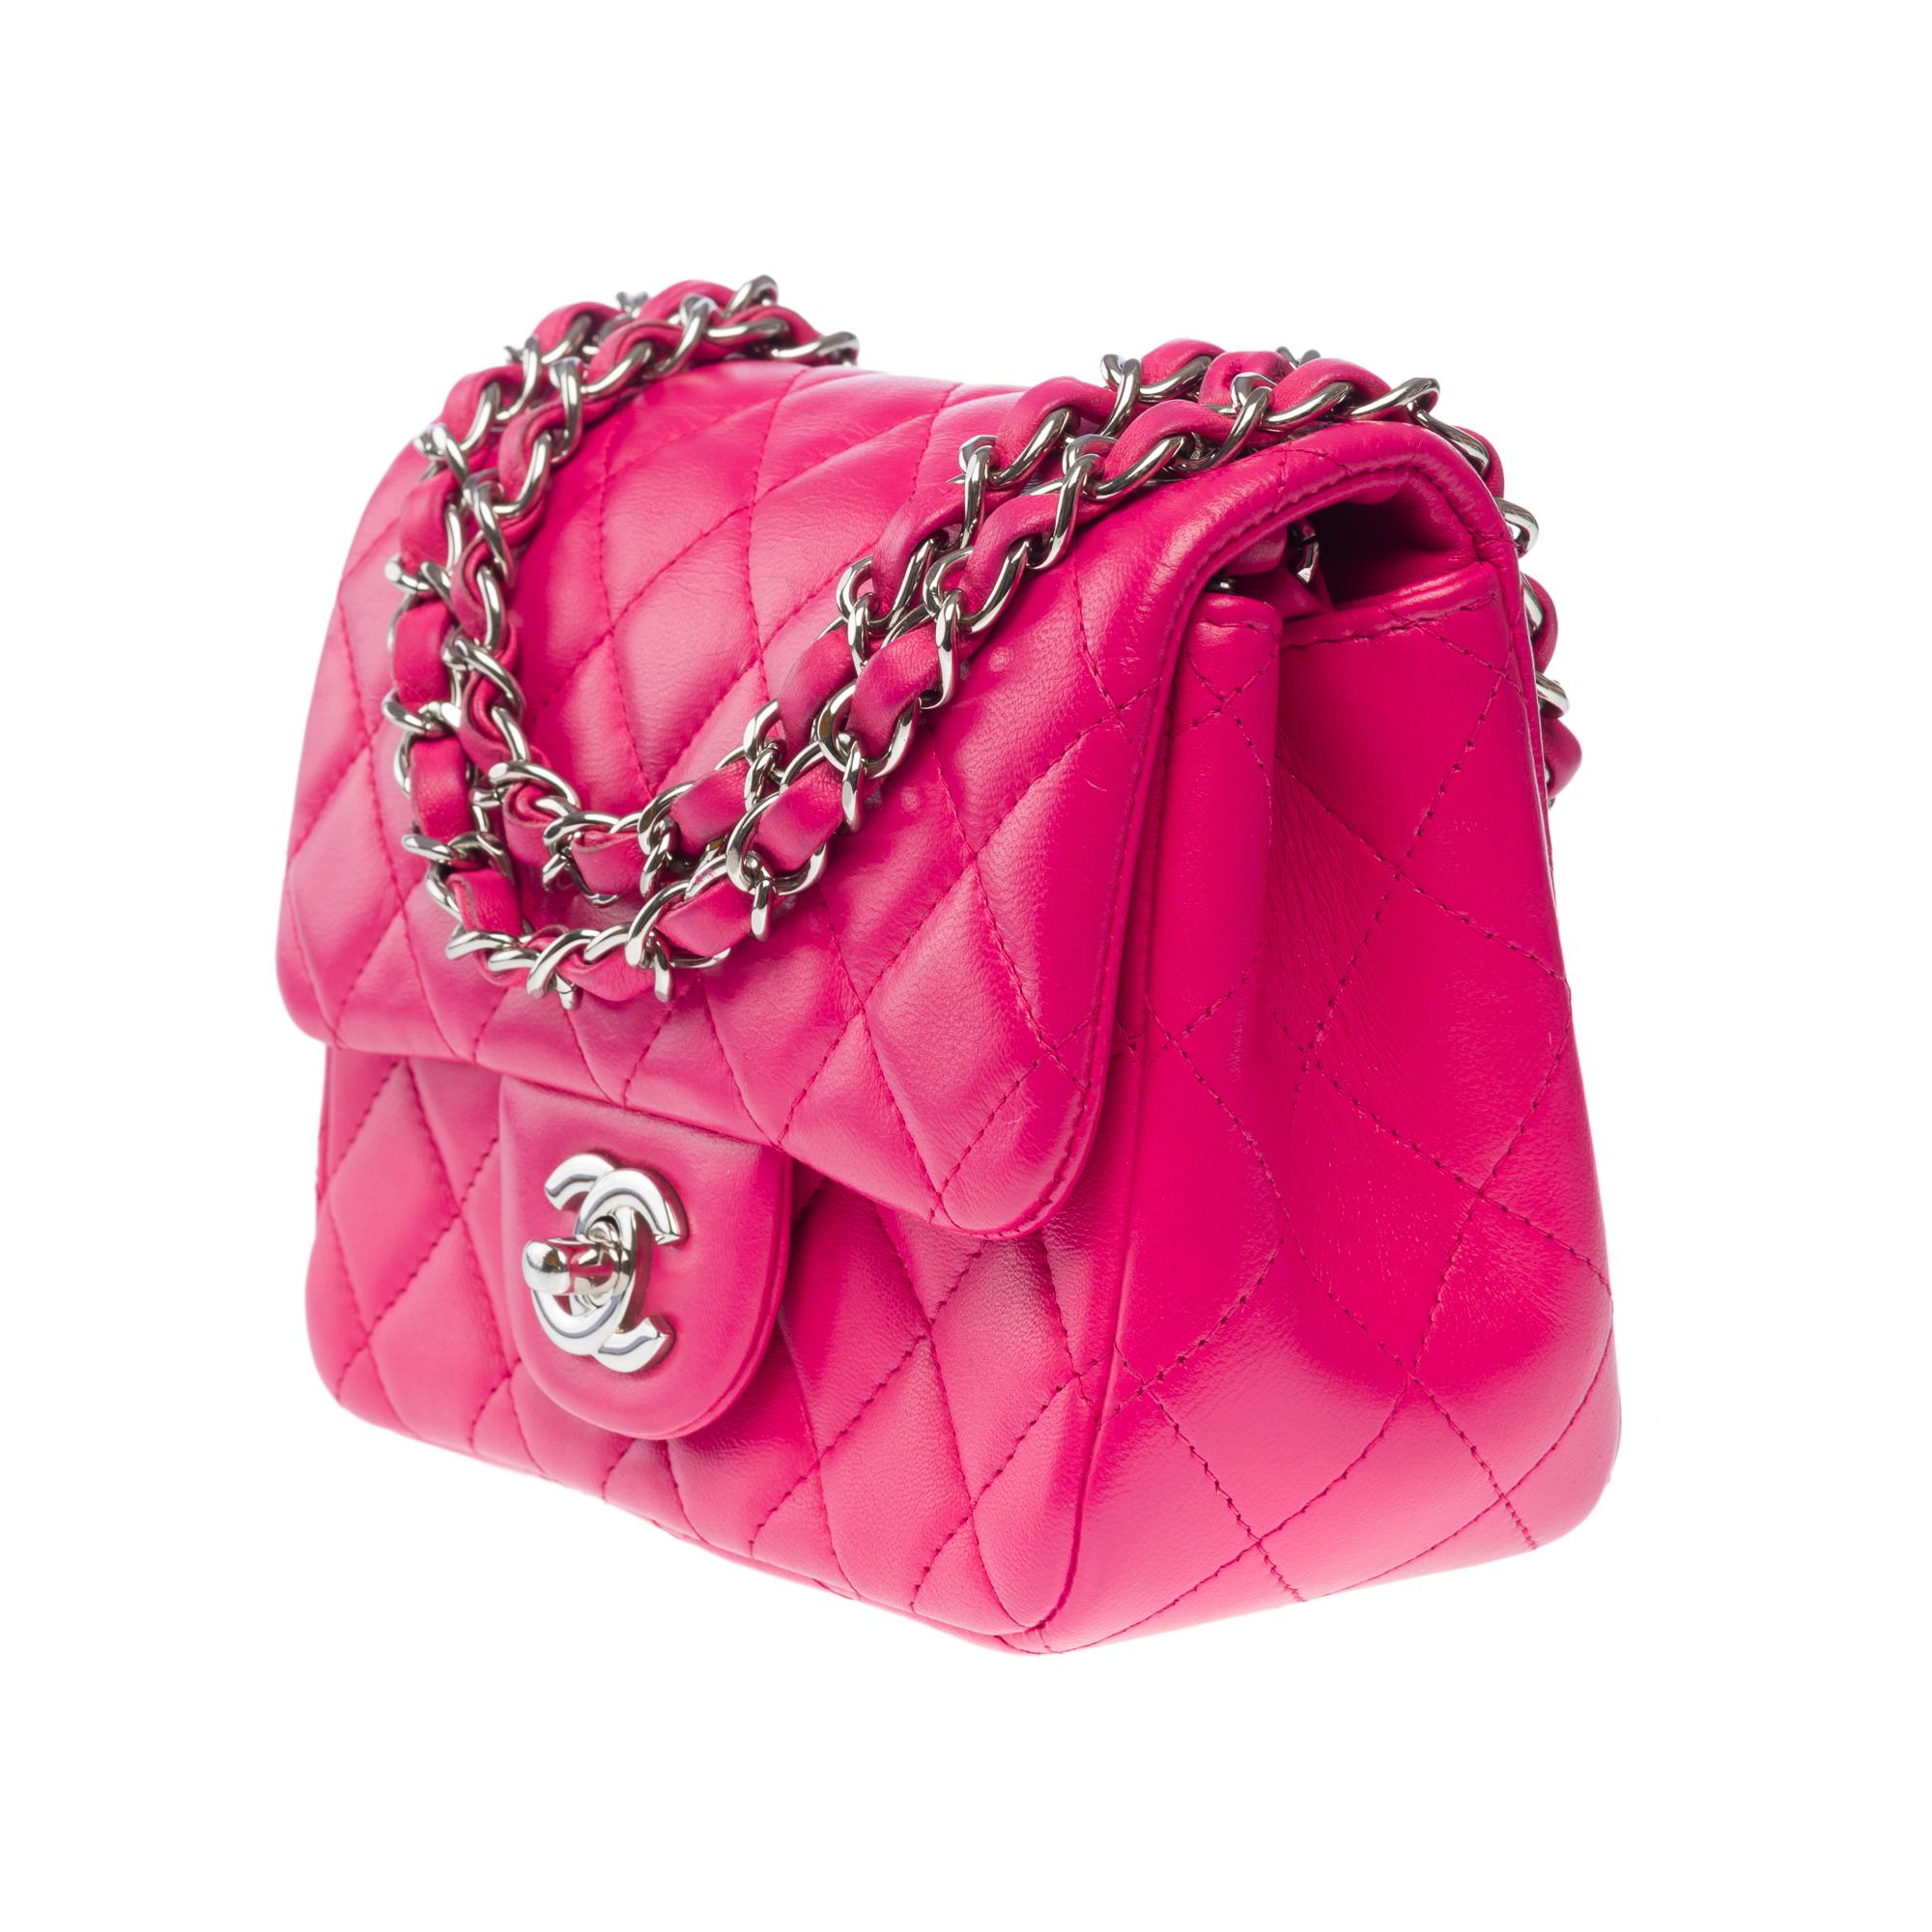 Women's Gorgeous Chanel Mini Timeless Shoulder flap bag in Pink quilted leather, SHW For Sale